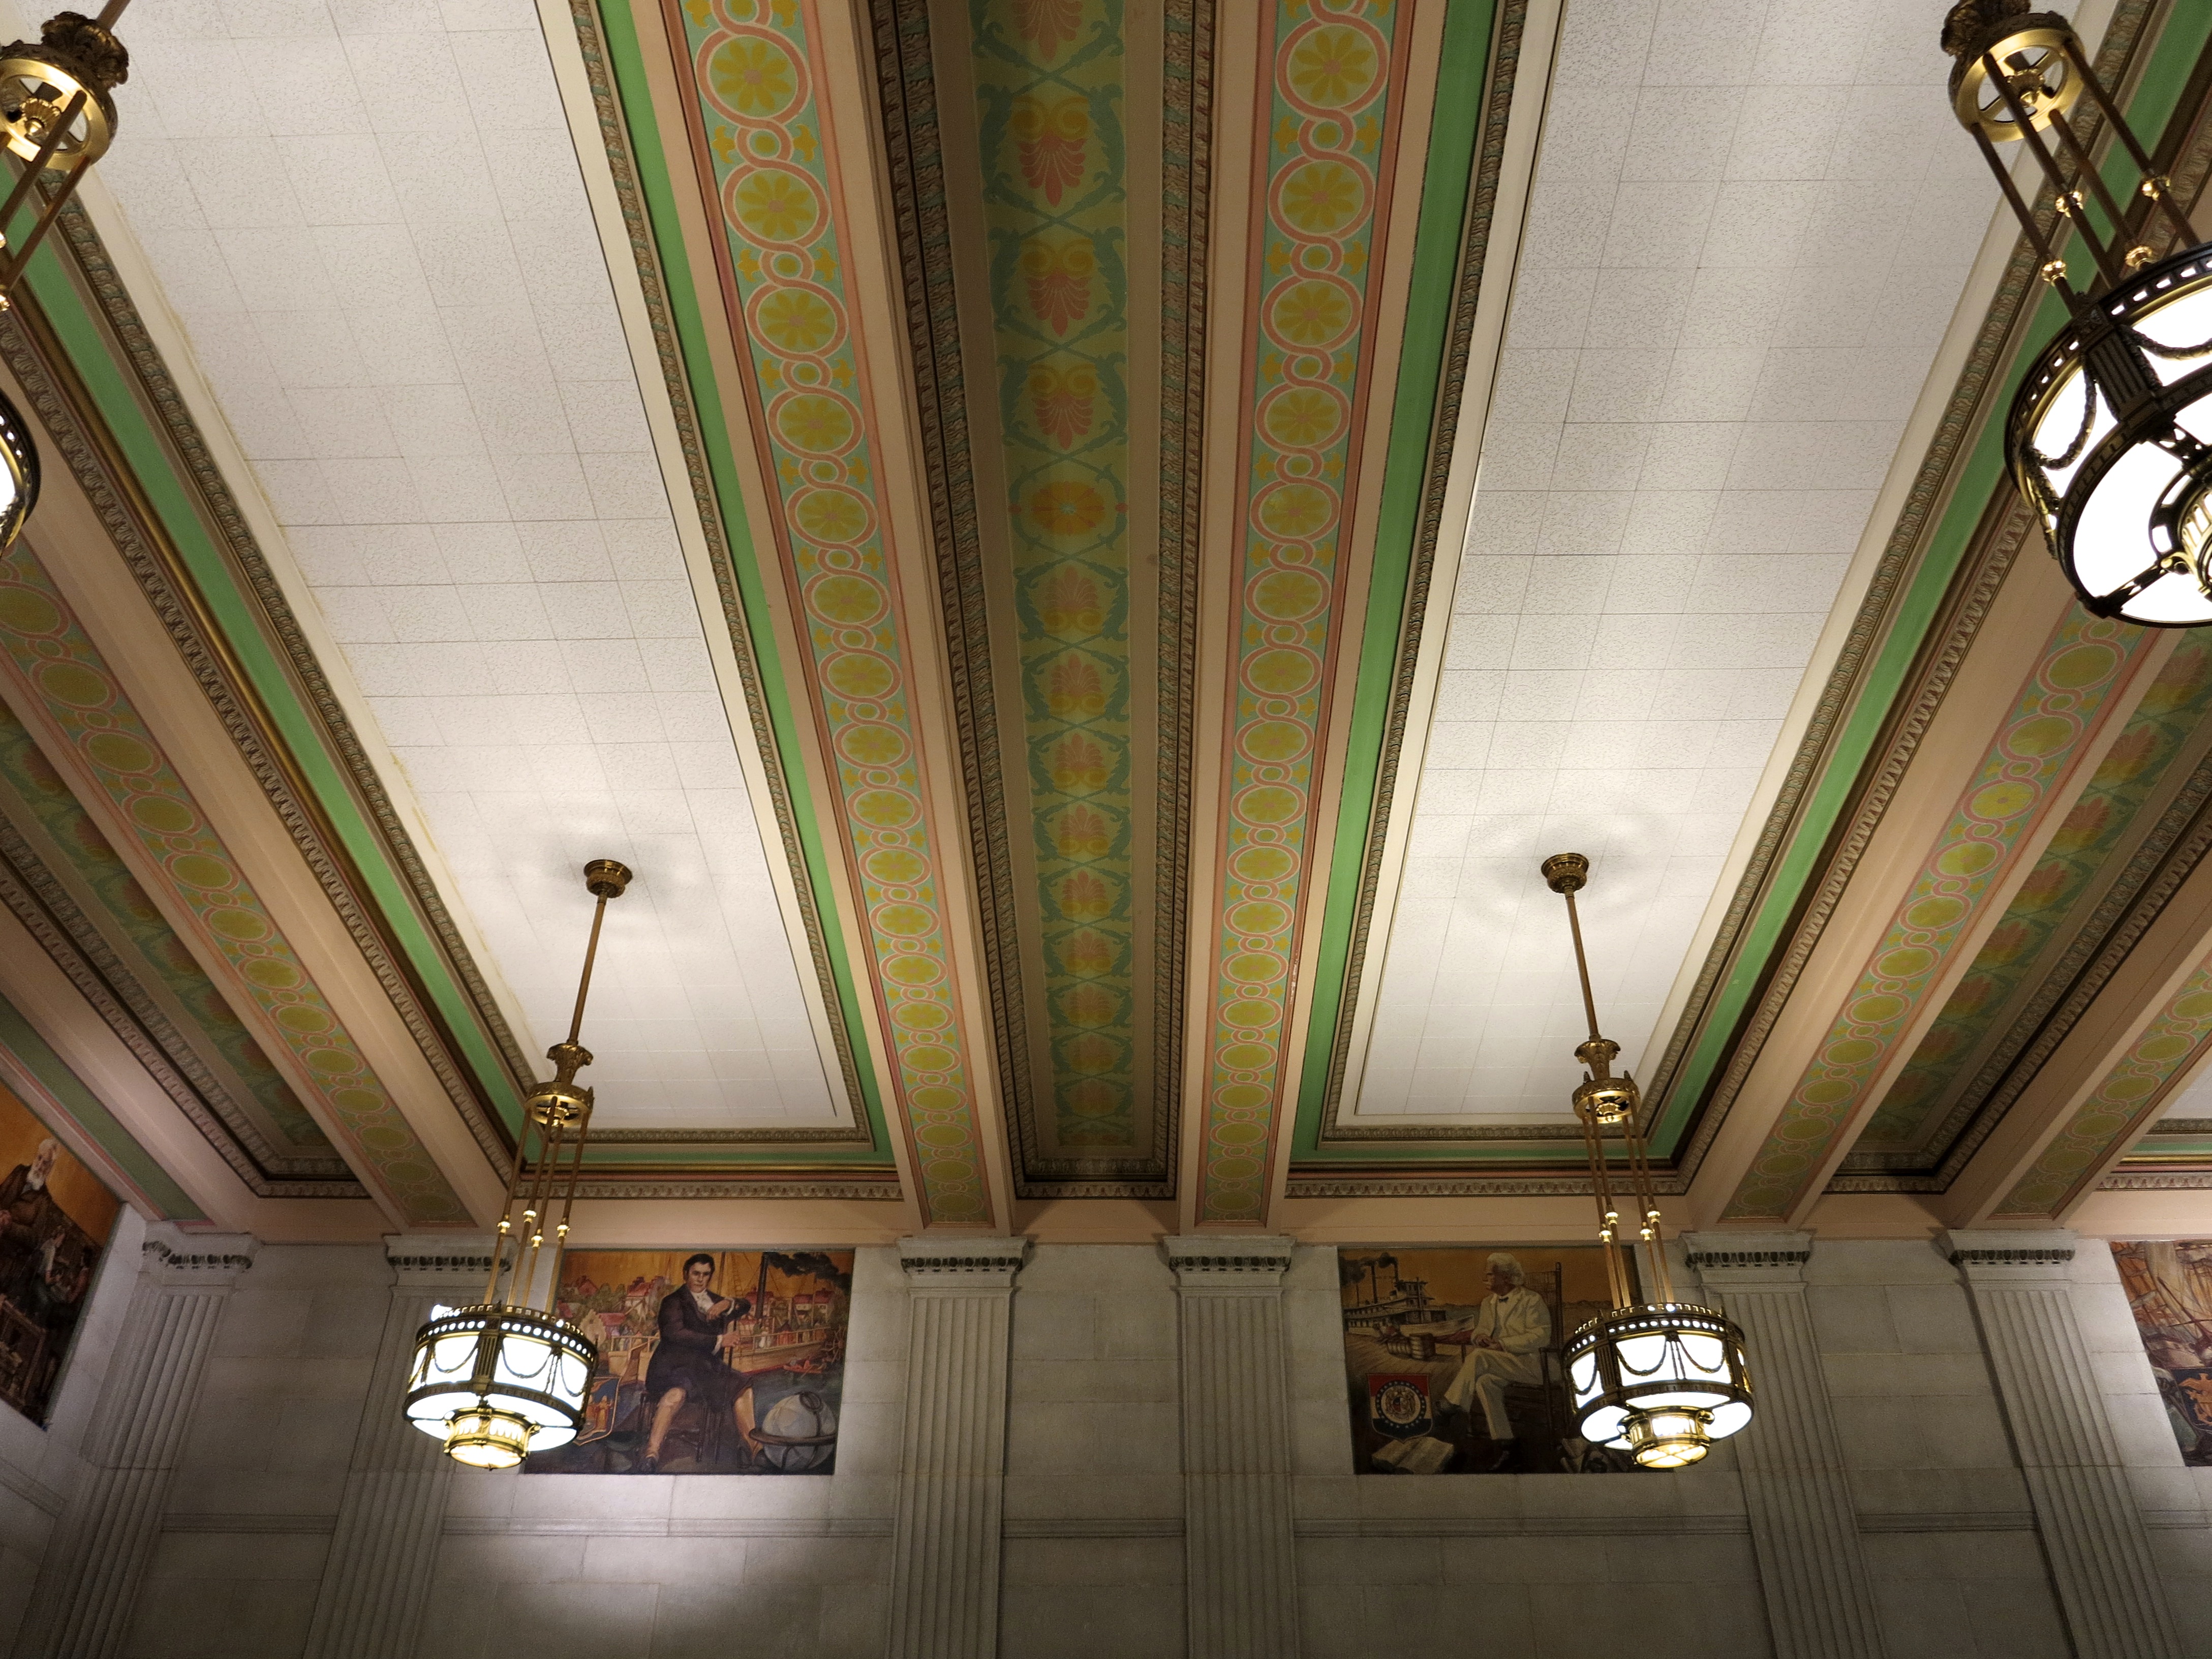 West Waiting Room murals depict important figures in American history. 